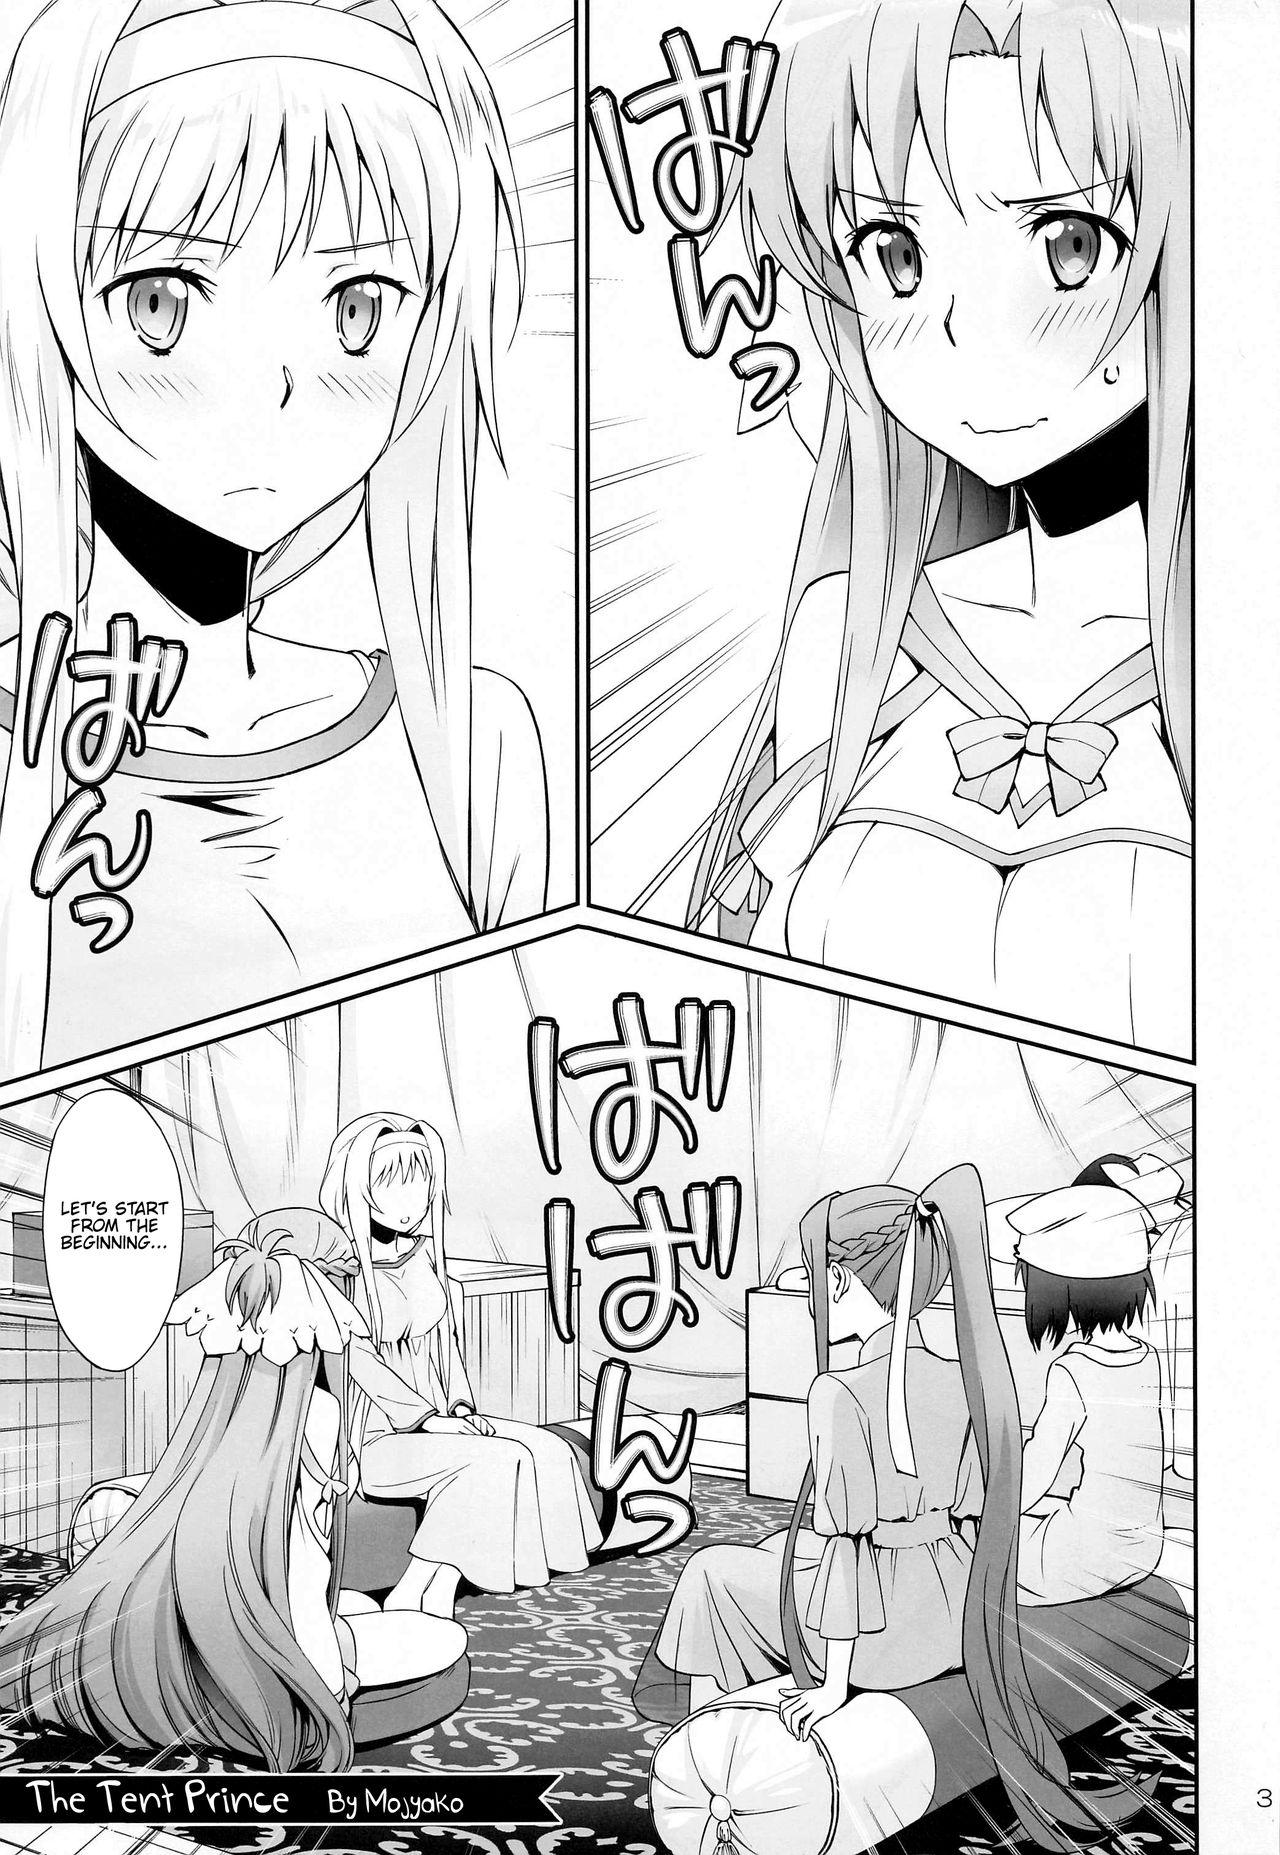 Family Roleplay Tent no Ouji-sama - Sword art online Large - Page 2